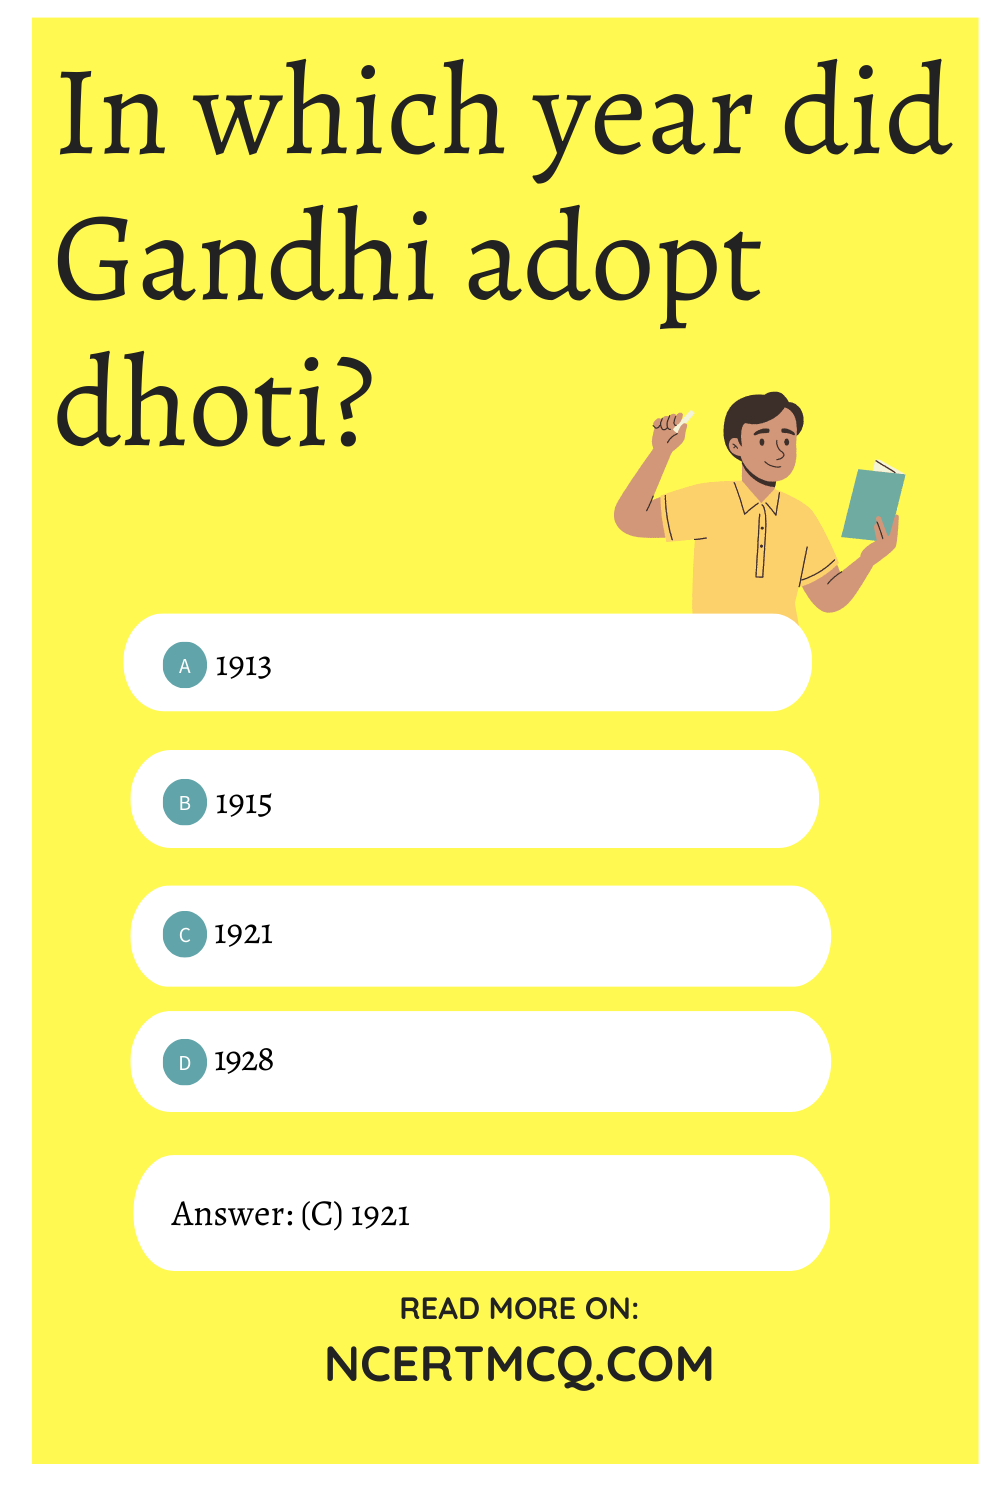 In which year did Gandhi adopt dhoti?